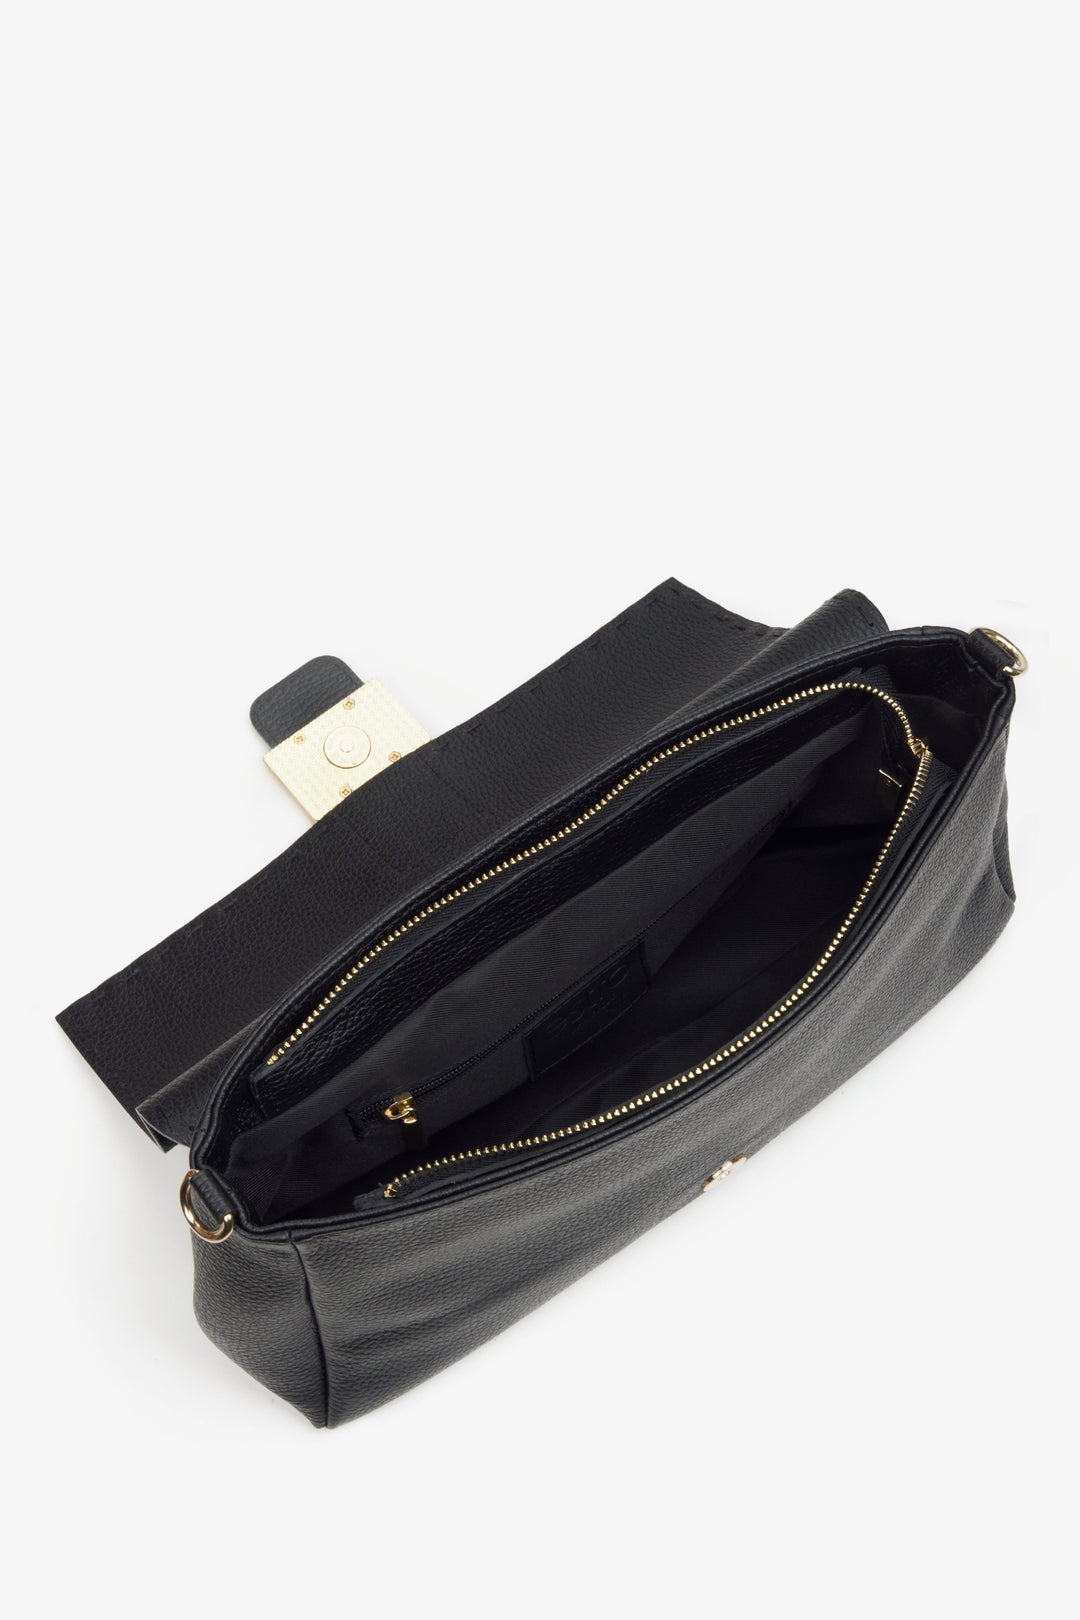 Women's black handbag made of Italian genuine leather by Estro - close-up on the interior of the model.